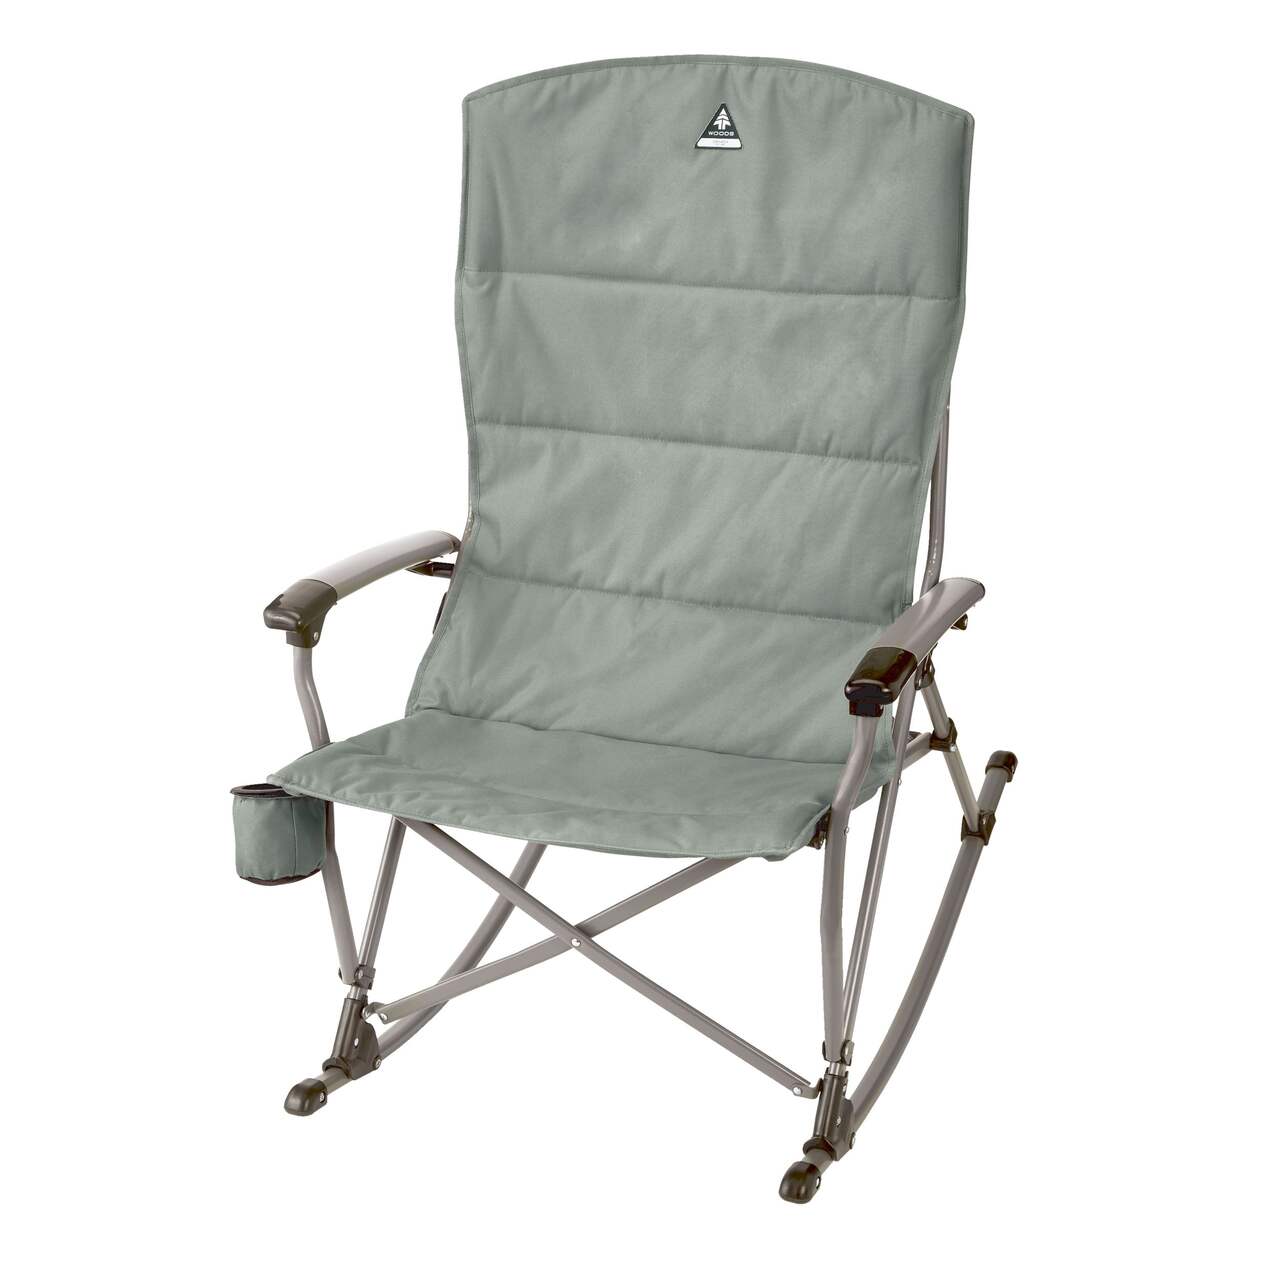 Woods Kaslo Portable Folding Padded Rocking Camping Chair w/ Cup